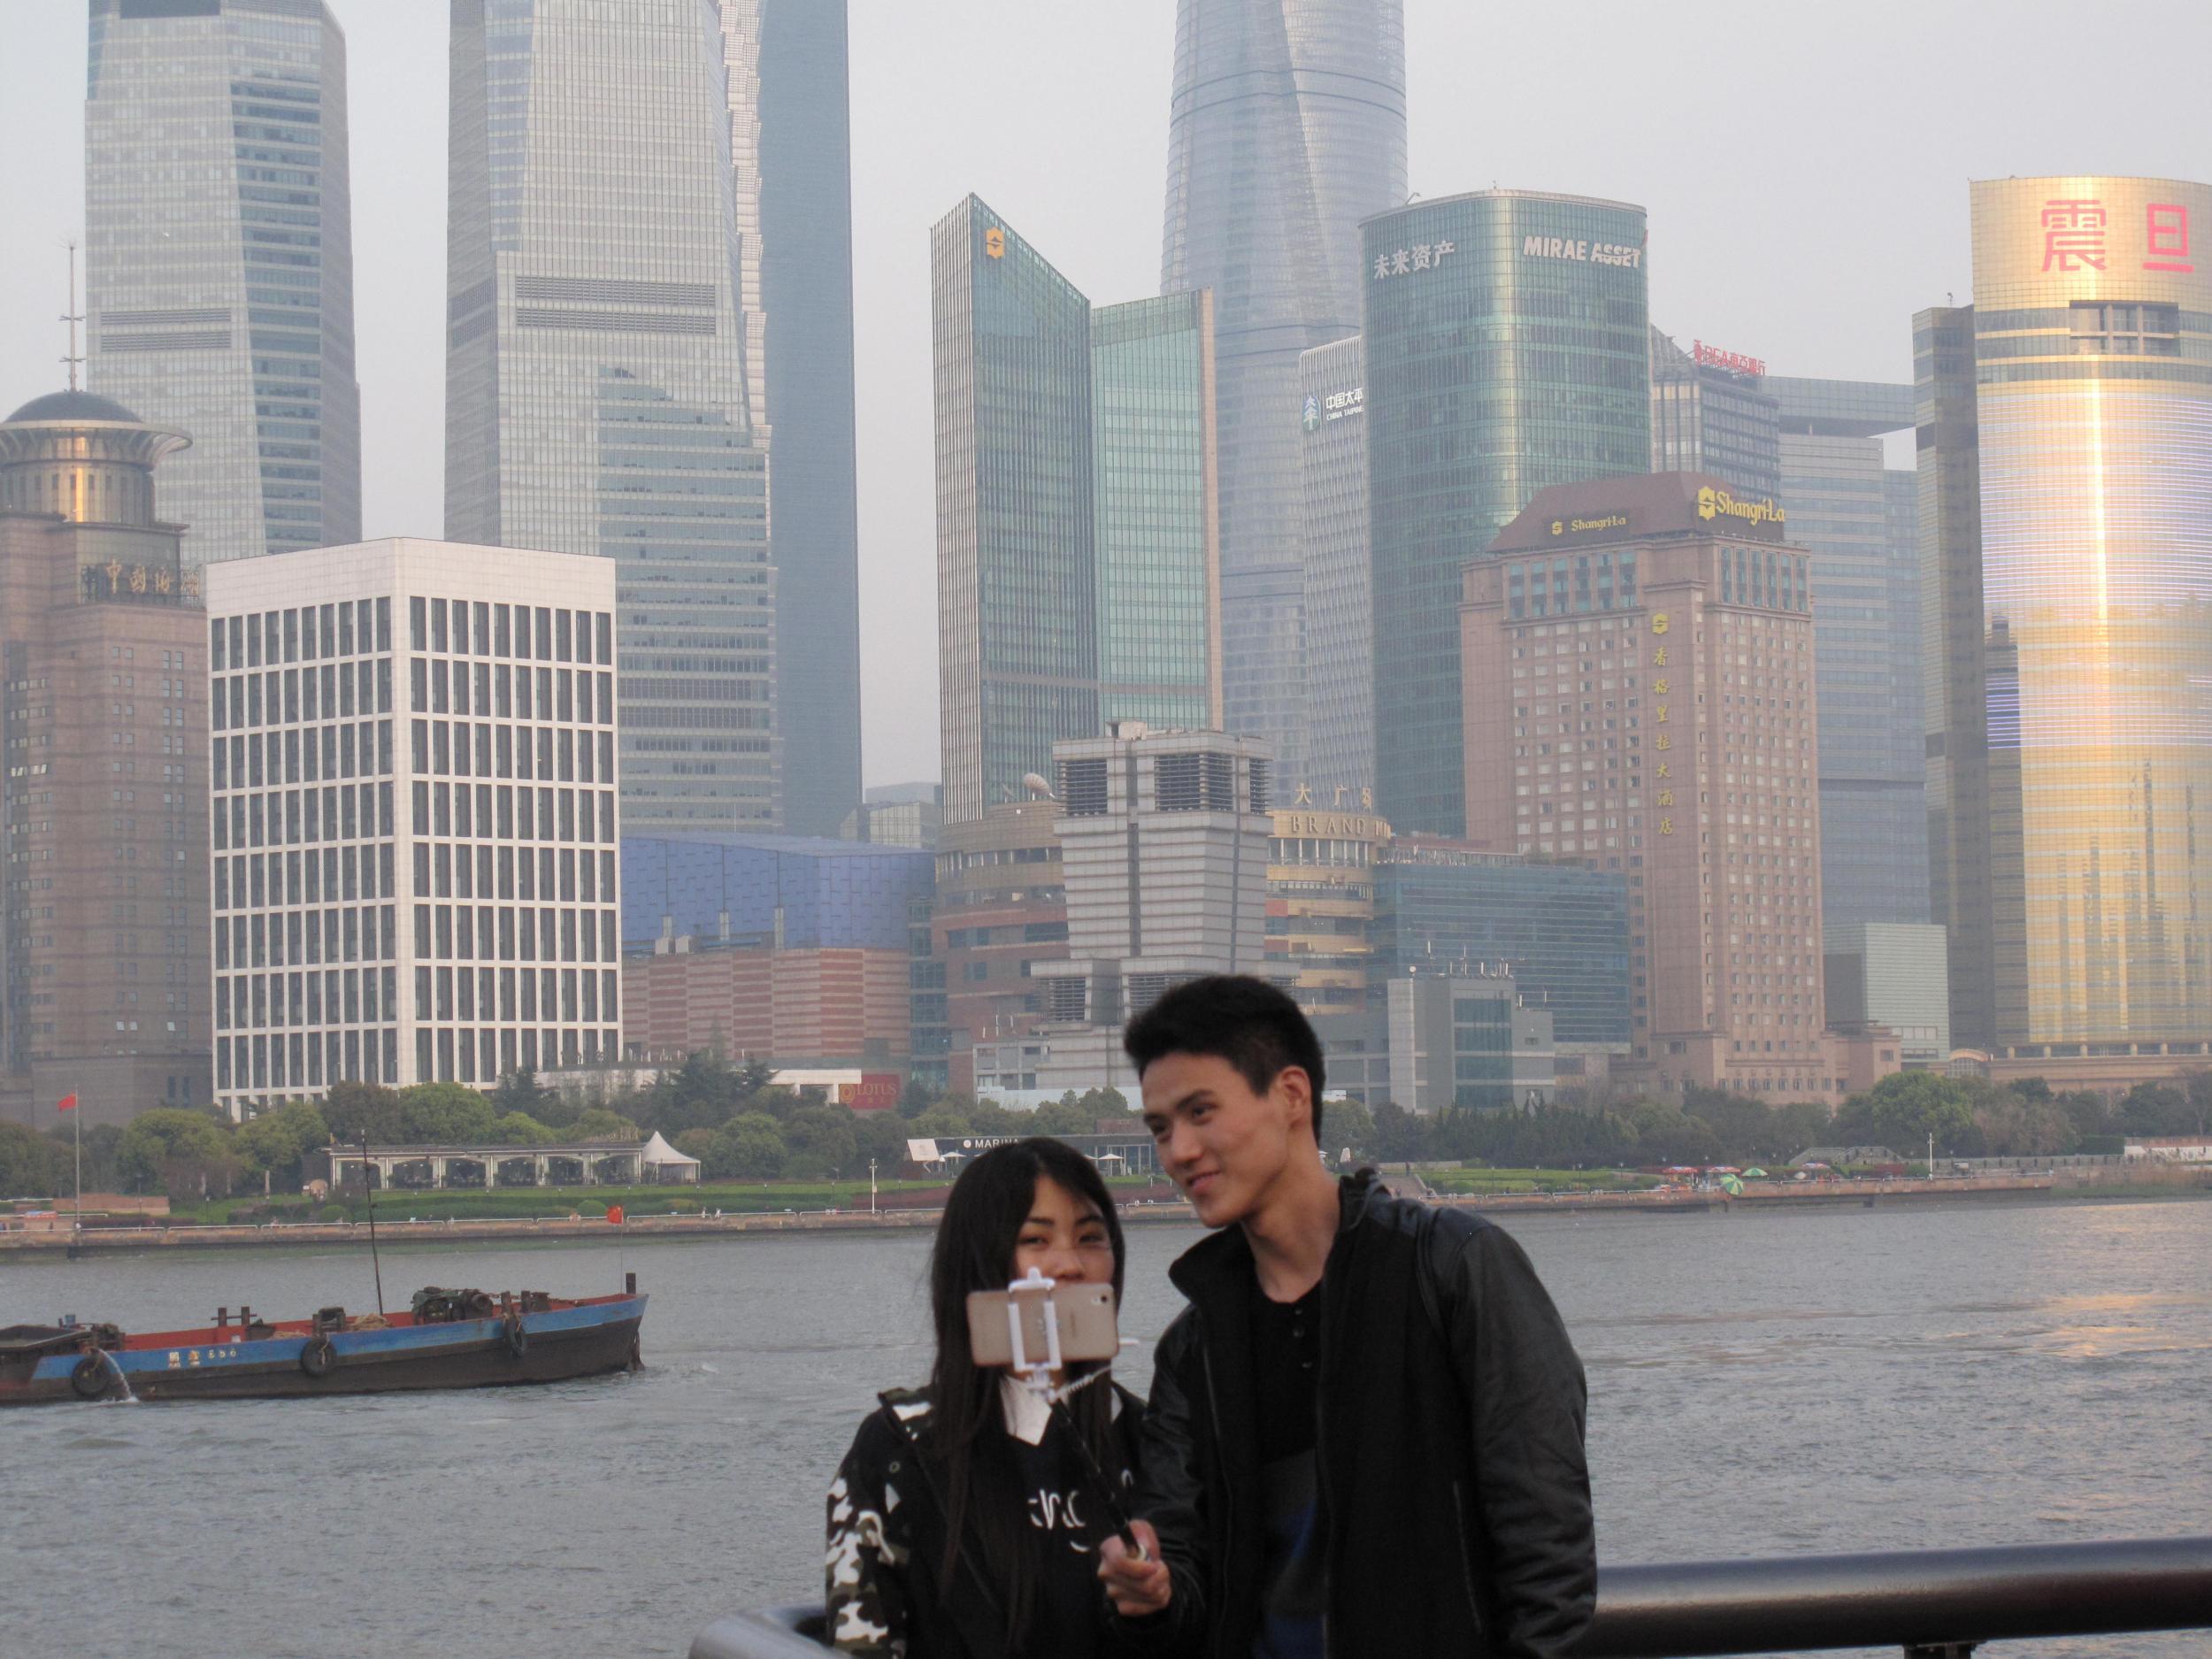 Picture this: The river view from Shanghai's historic bund